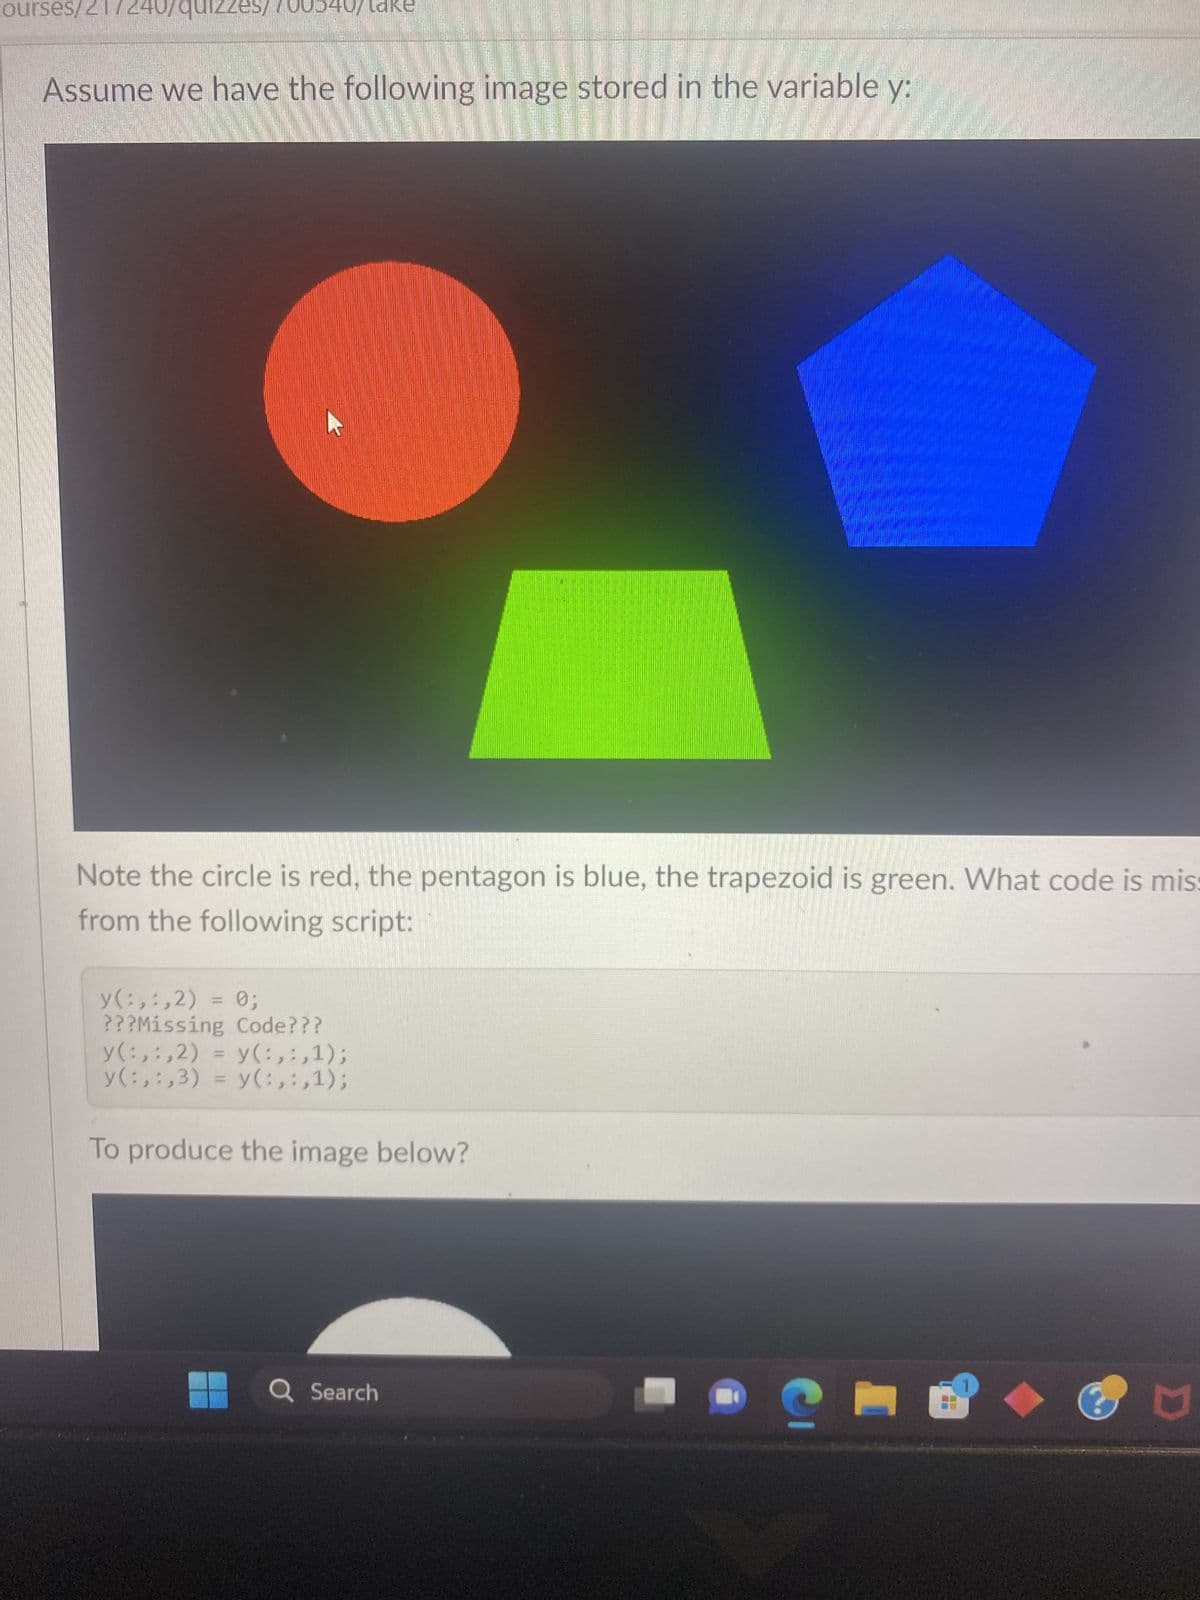 courses/21/240/quizze. 700540
Assume we have the following image stored in the variable y:
Note the circle is red, the pentagon is blue, the trapezoid is green. What code is mis:
from the following script:
y(:,:,2) = 0;
???Missing Code???
y(:,:,2) = y(:,:,1);
y(:,:,3) = y(:,:,1);
To produce the image below?
Q Search
M